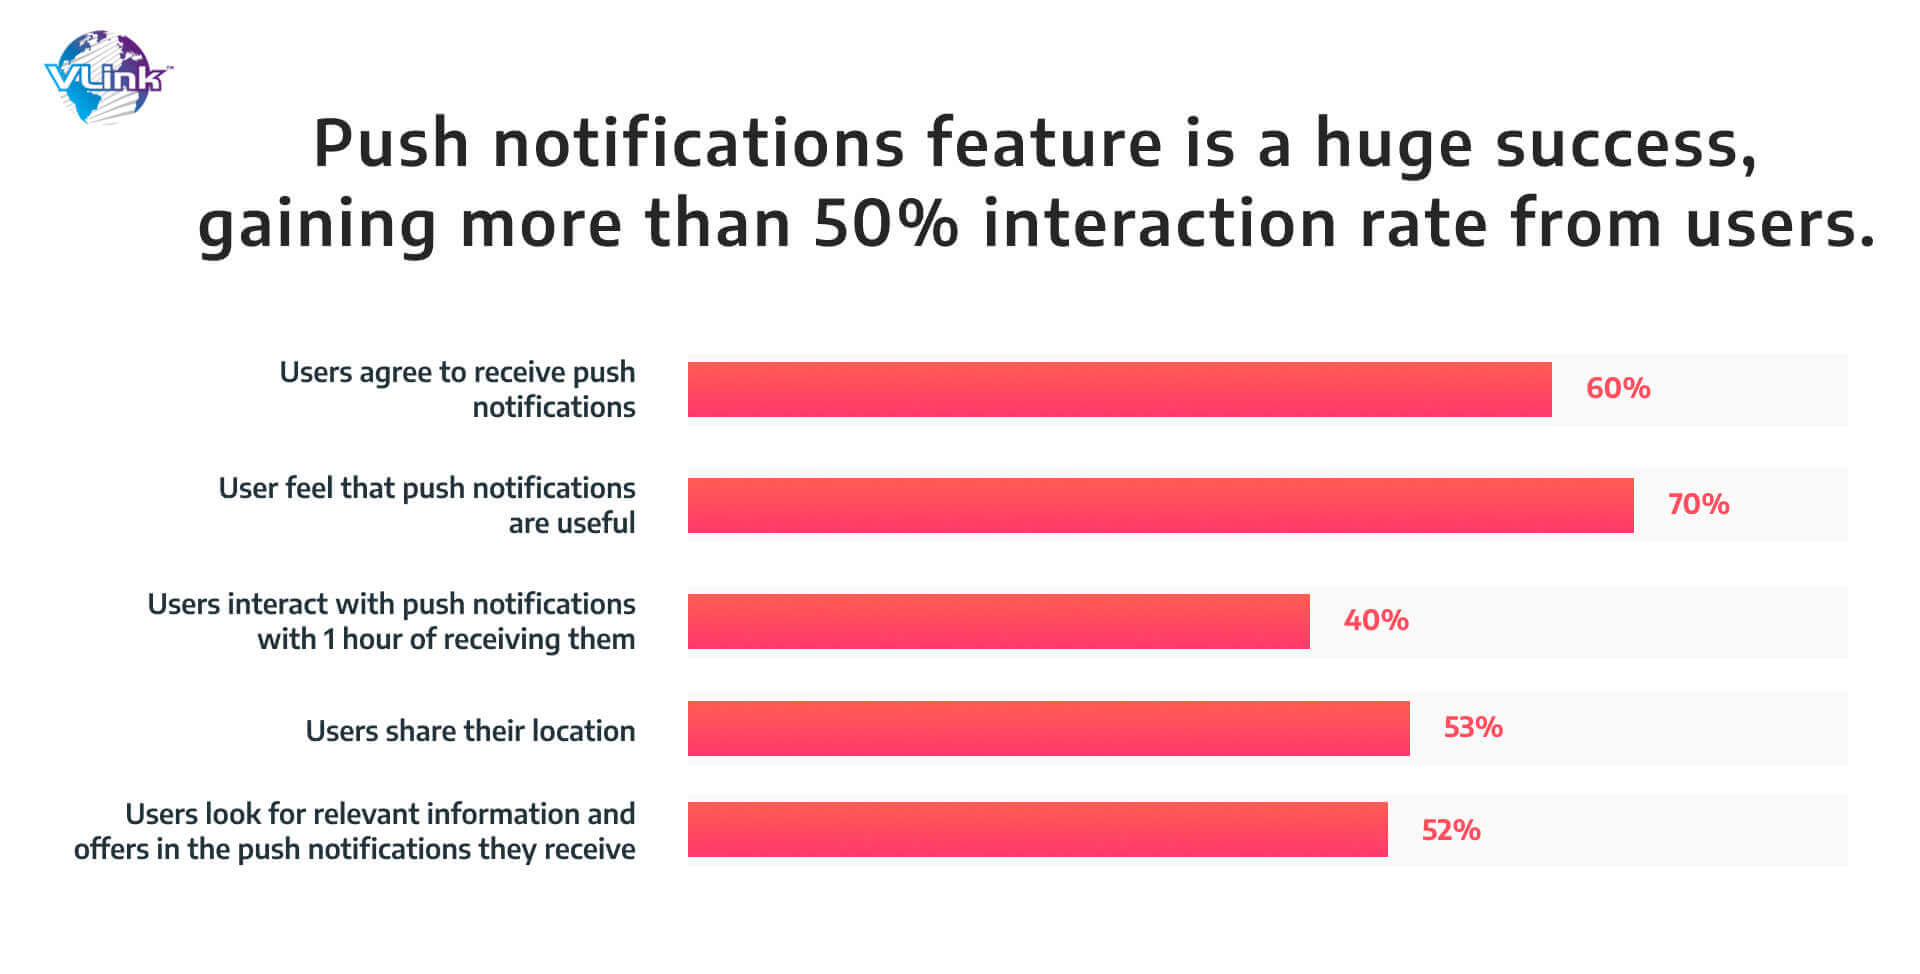 Push notifications feature is a huge success, gaining more than 50% interaction rate from users